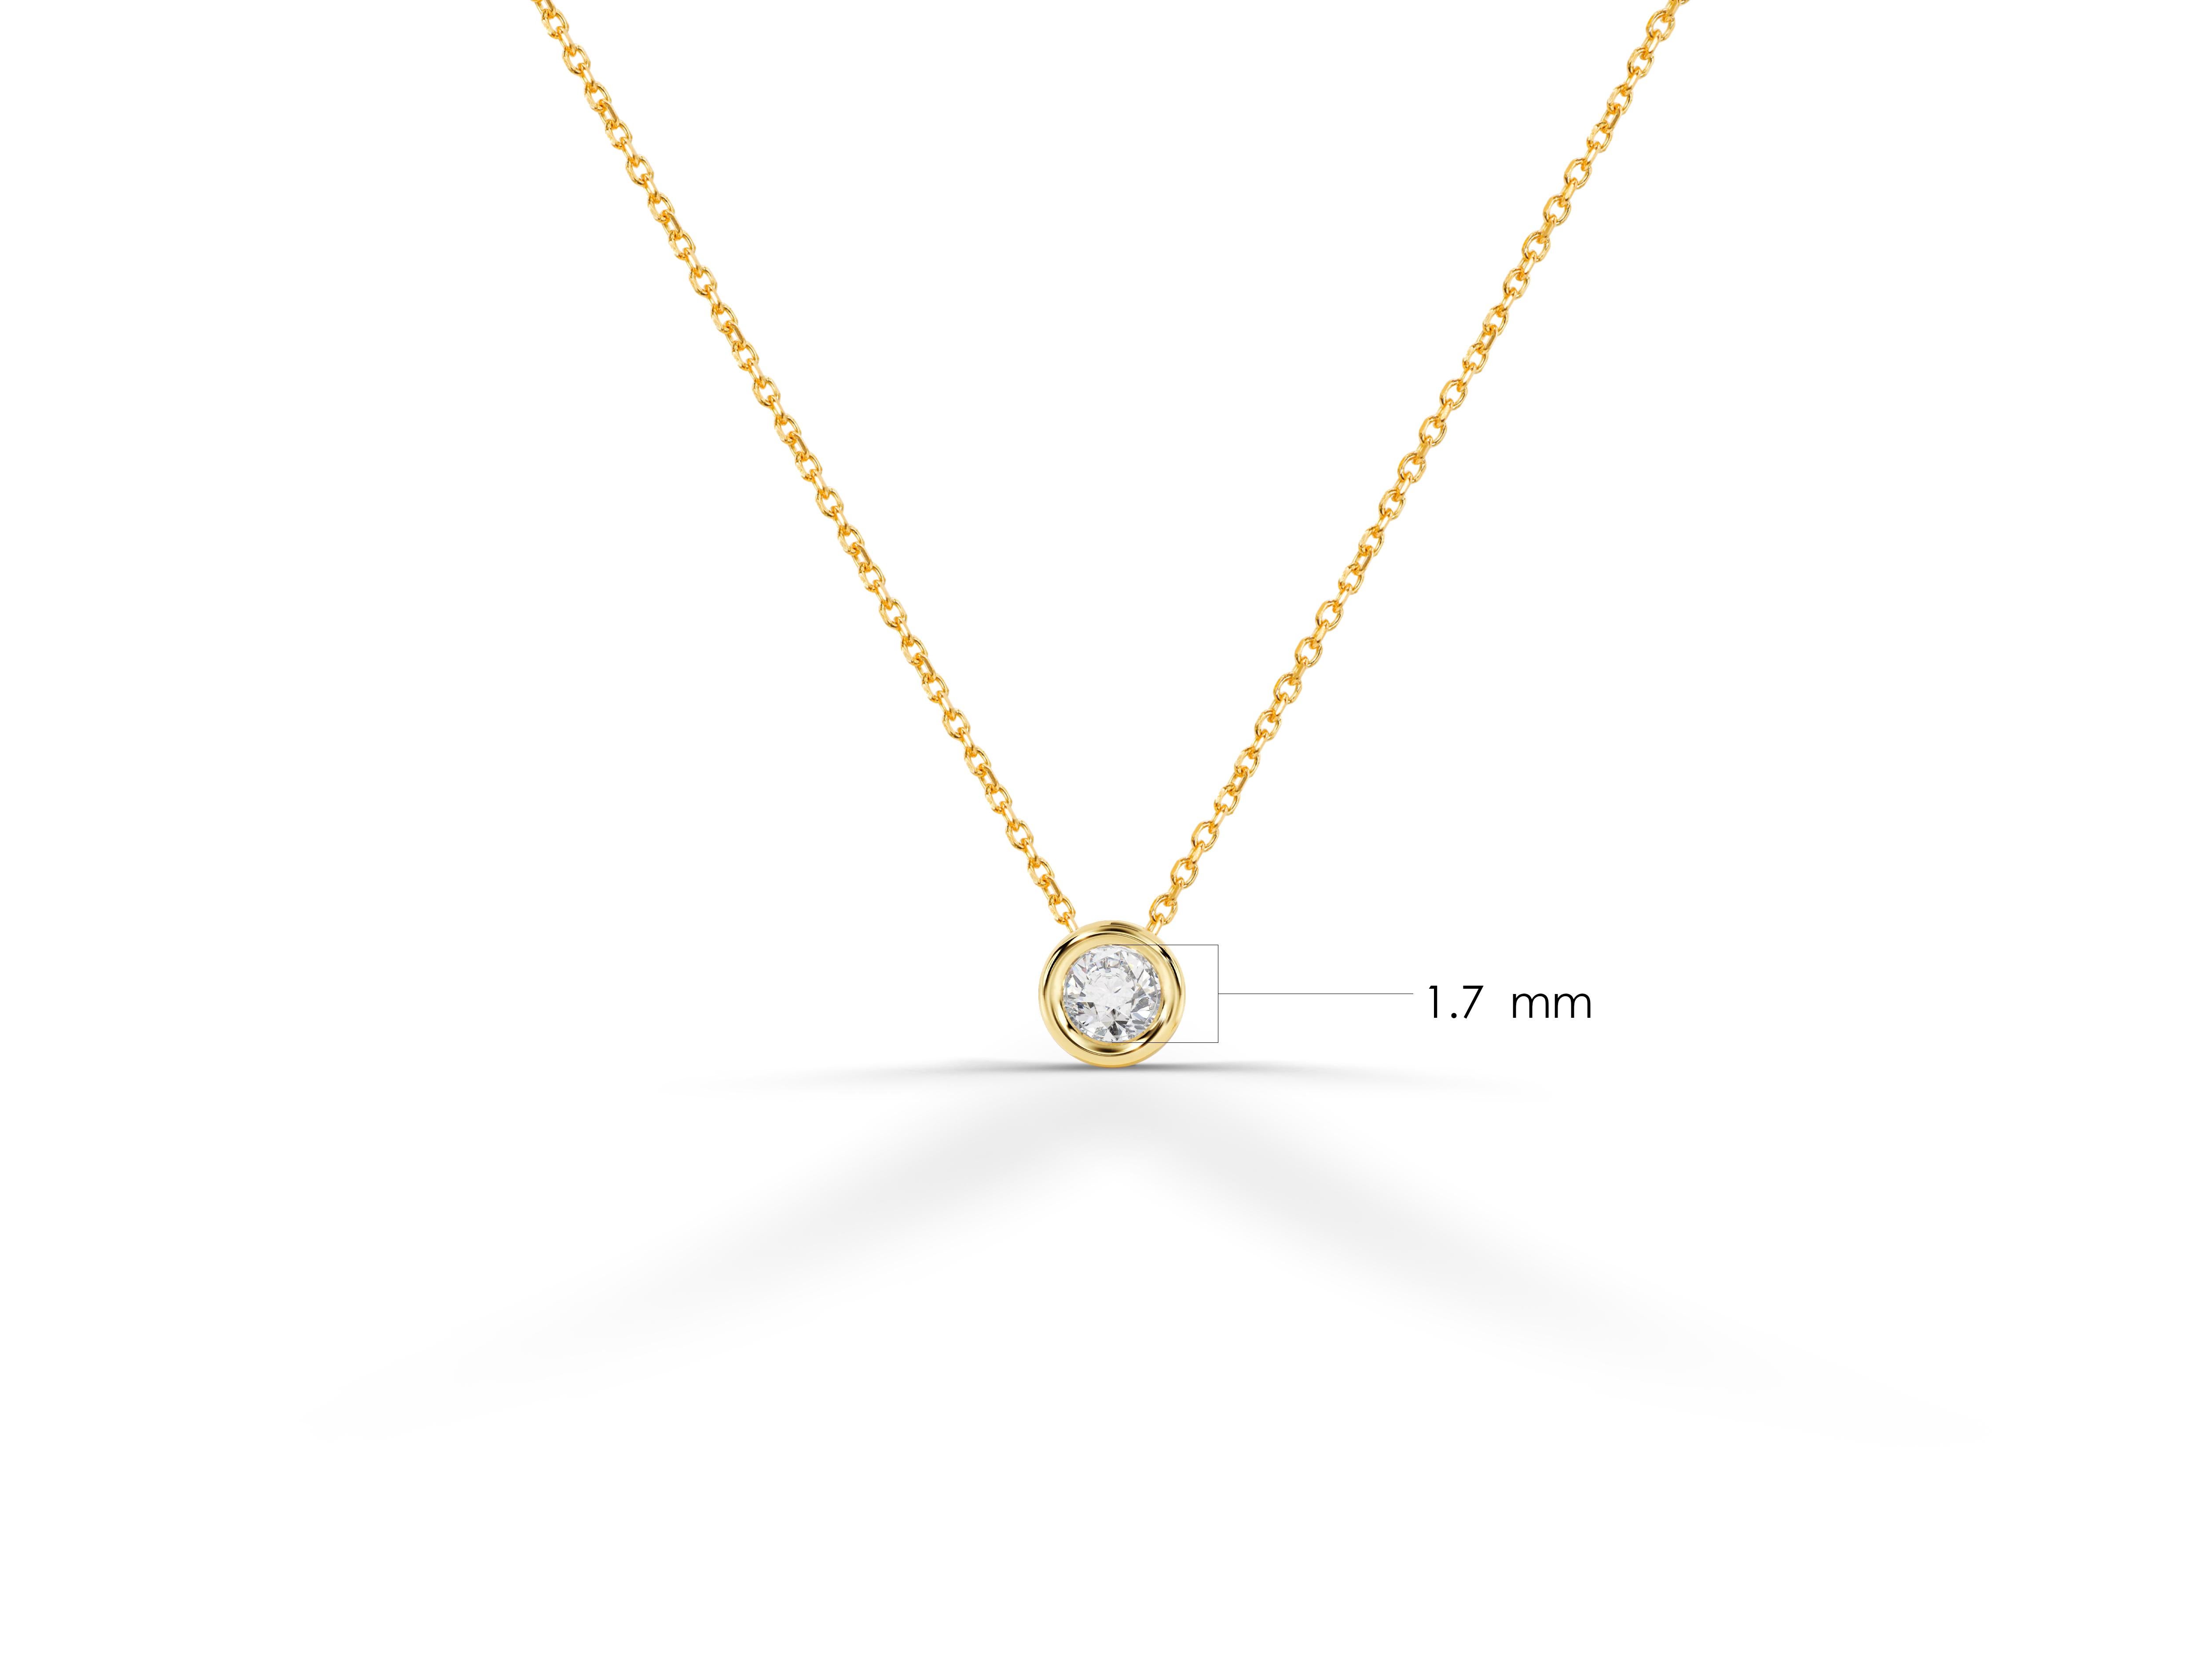 Delicate Minimal Necklace made of 14k solid gold available in three colors of gold, Yellow Gold / White Gold / Rose Gold.

Brilliant White Sparkly Natural Diamond Bezel hanging in center of a thin dainty gold chain a perfect choice for everyday